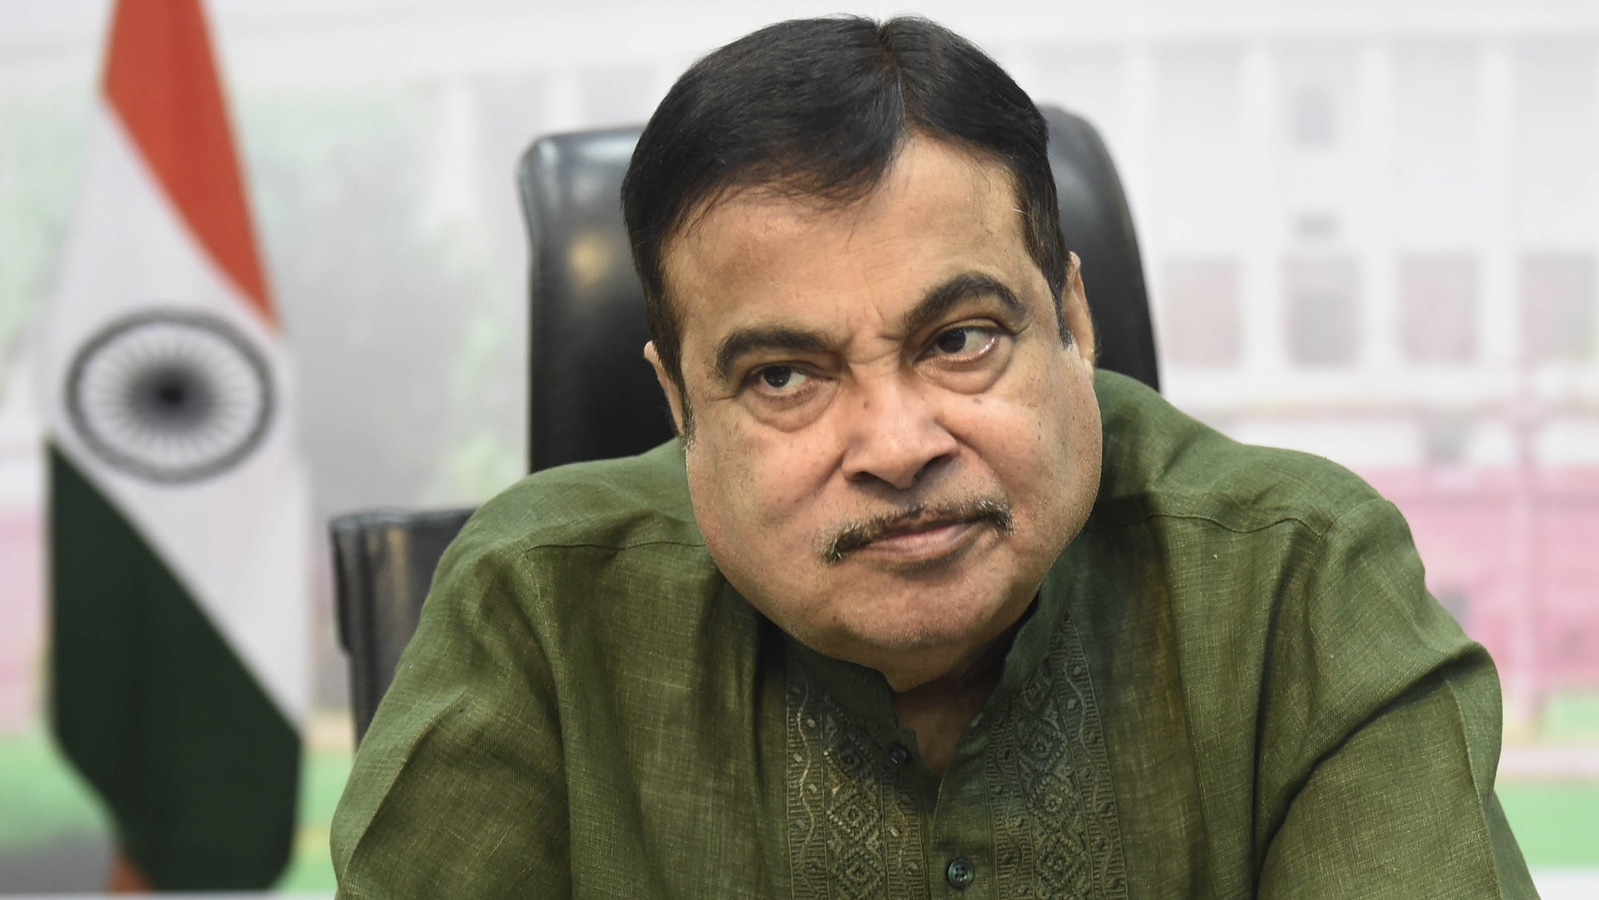 Seat belts mandatory for all passengers in car, violators to be fined:  Gadkari | Latest News India - Hindustan Times